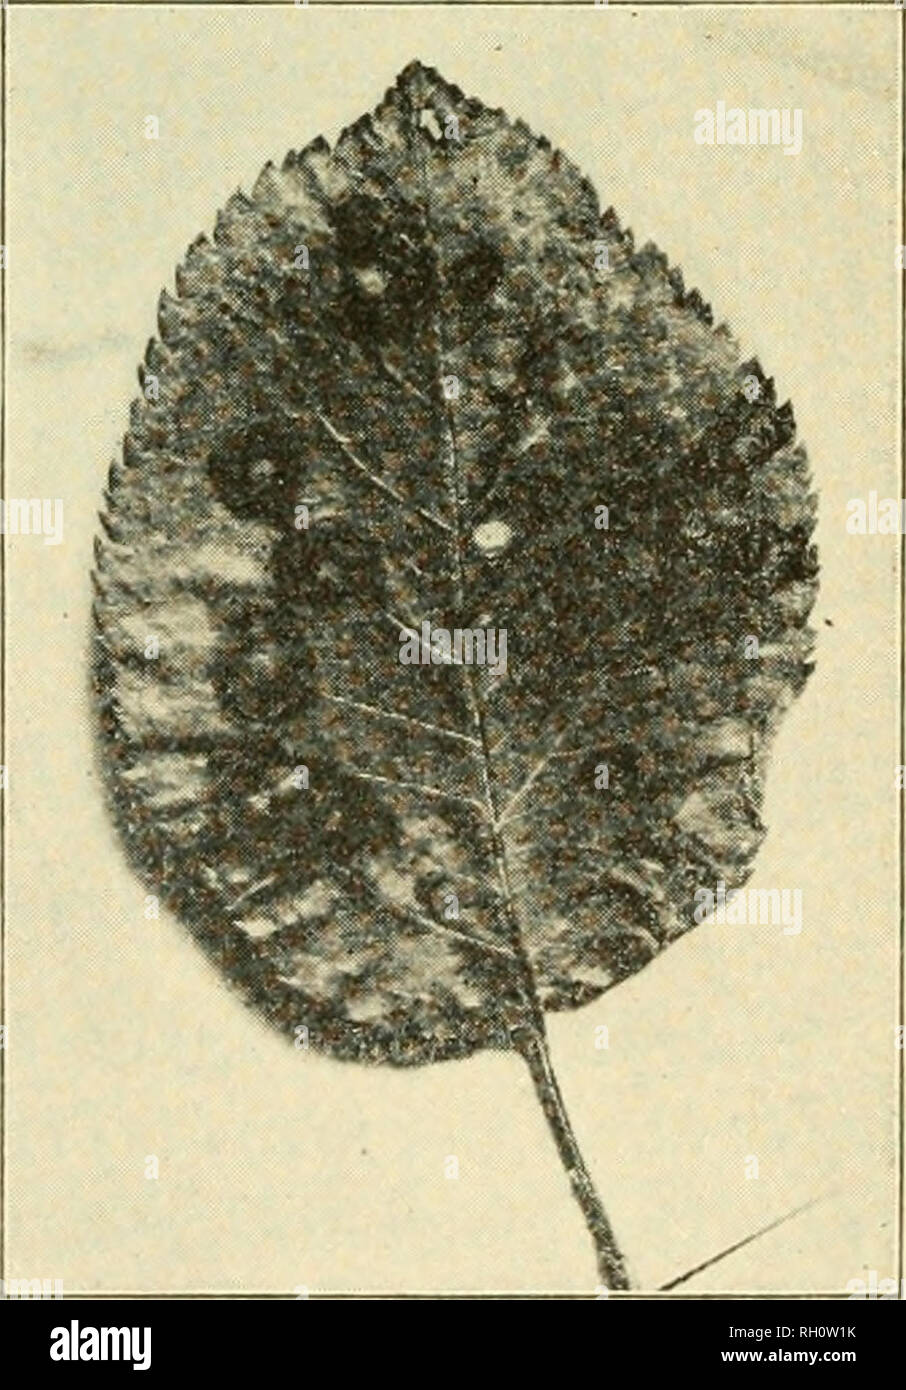 . Bulletin. Agriculture. Fig. 22.—Early stage of Leaf Spot. The cause of the leaf spot has occasioned no little difficulty. A number of fungi have been found to be present in the spots, but inoculation experiments have indi- cated that Sphoeropsis Malorum is probably the only one that is of importance in the production of the disease. Treatment. The fact that one fungus is responsible for three different forms of disease makes its destruction a matter of special importance and rather unusual difficulty. Spraying has been quite effective in controlling the leaf spot. In the summer of 1908 the p Stock Photo